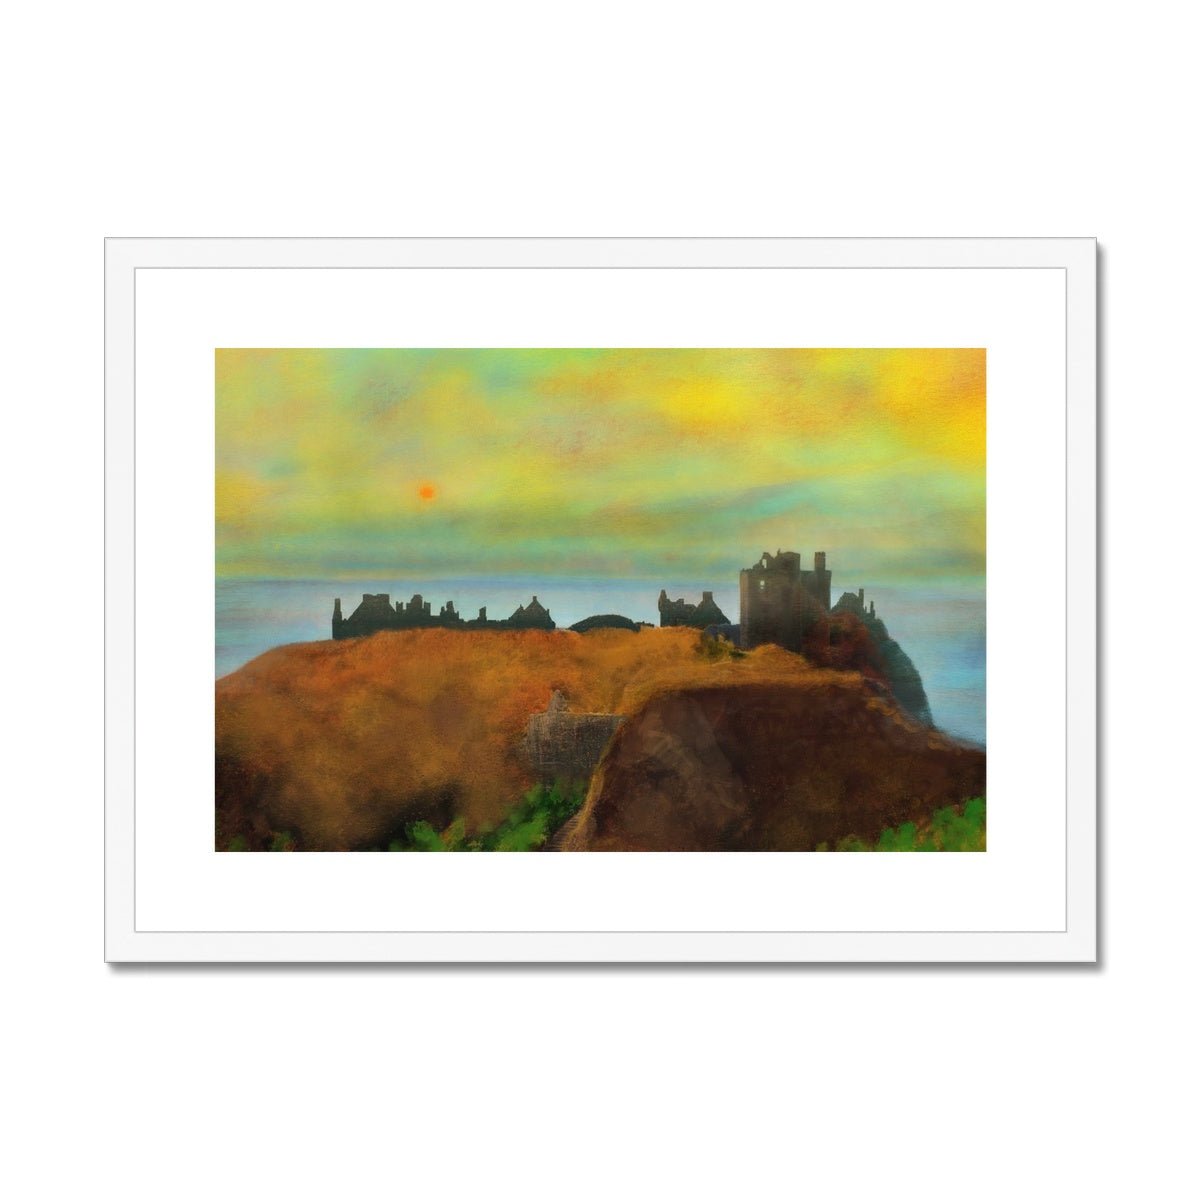 Dunnottar Castle Dusk Painting | Framed & Mounted Prints From Scotland-Framed & Mounted Prints-Historic & Iconic Scotland Art Gallery-A2 Landscape-White Frame-Paintings, Prints, Homeware, Art Gifts From Scotland By Scottish Artist Kevin Hunter